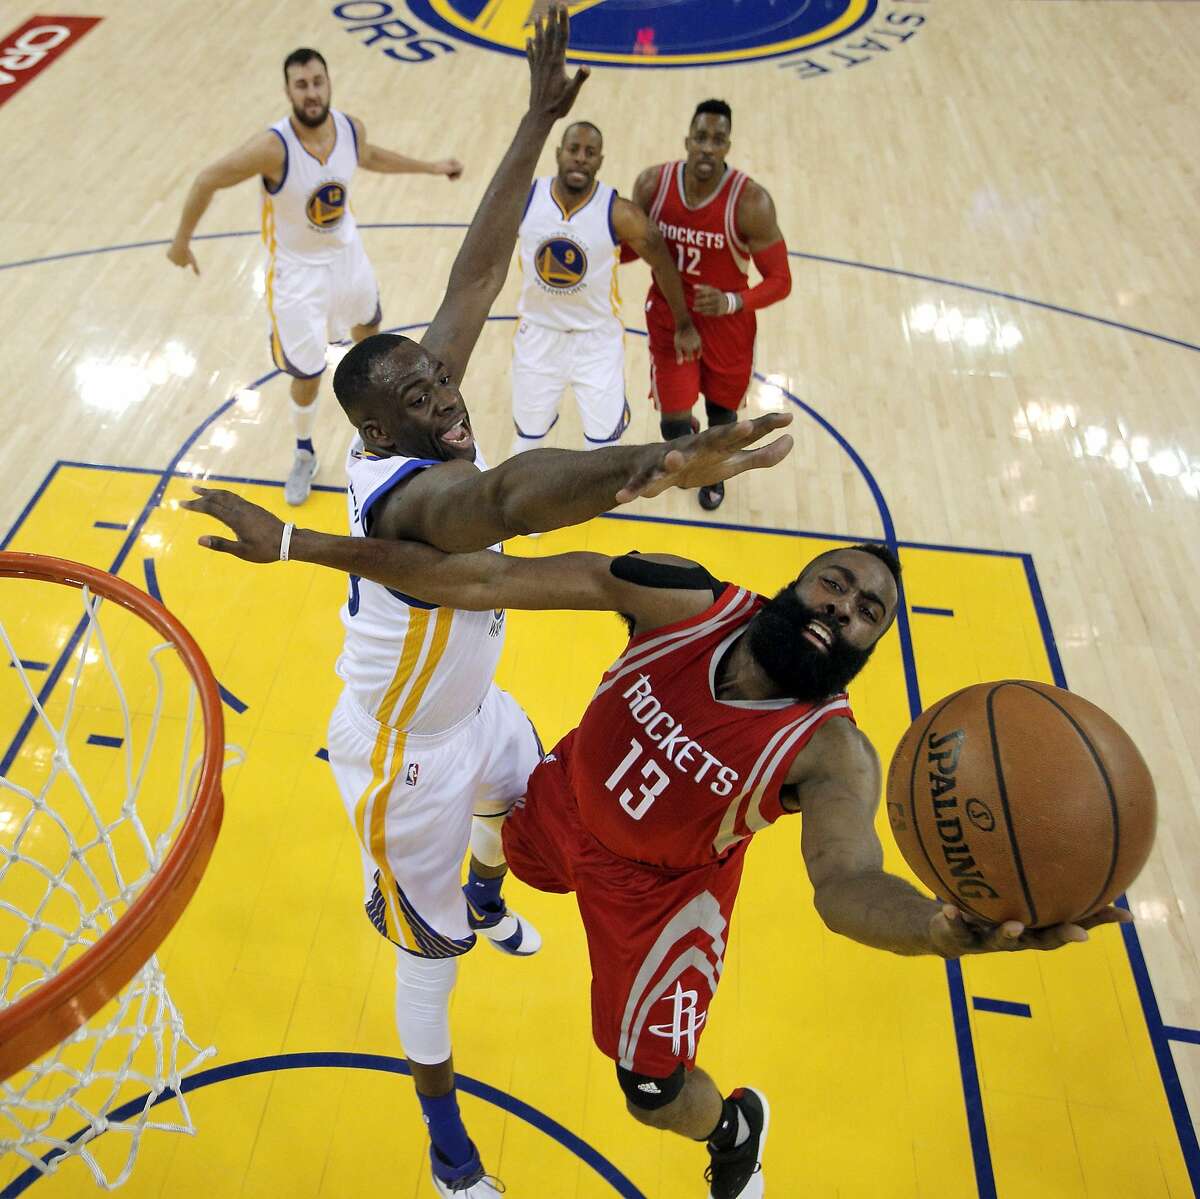 Draymond Green (left) finished second in the voting.